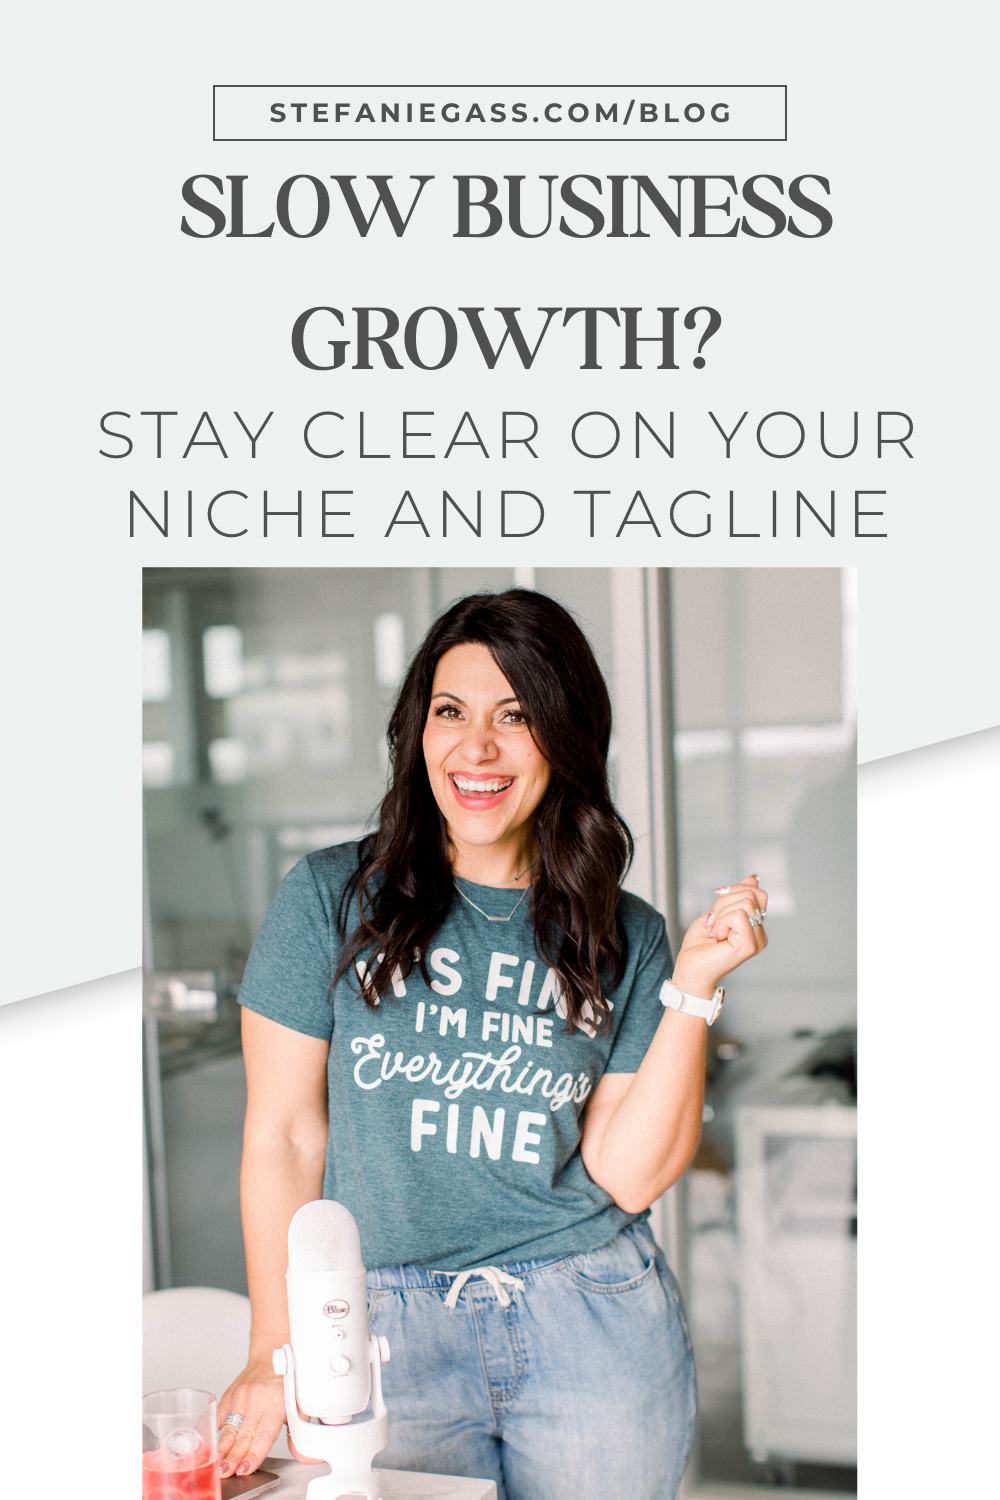 brown haired woman smiling and standing with a podcast microphone  Text reads: Slow Business Growth?  Stay clear on your niche and tagline